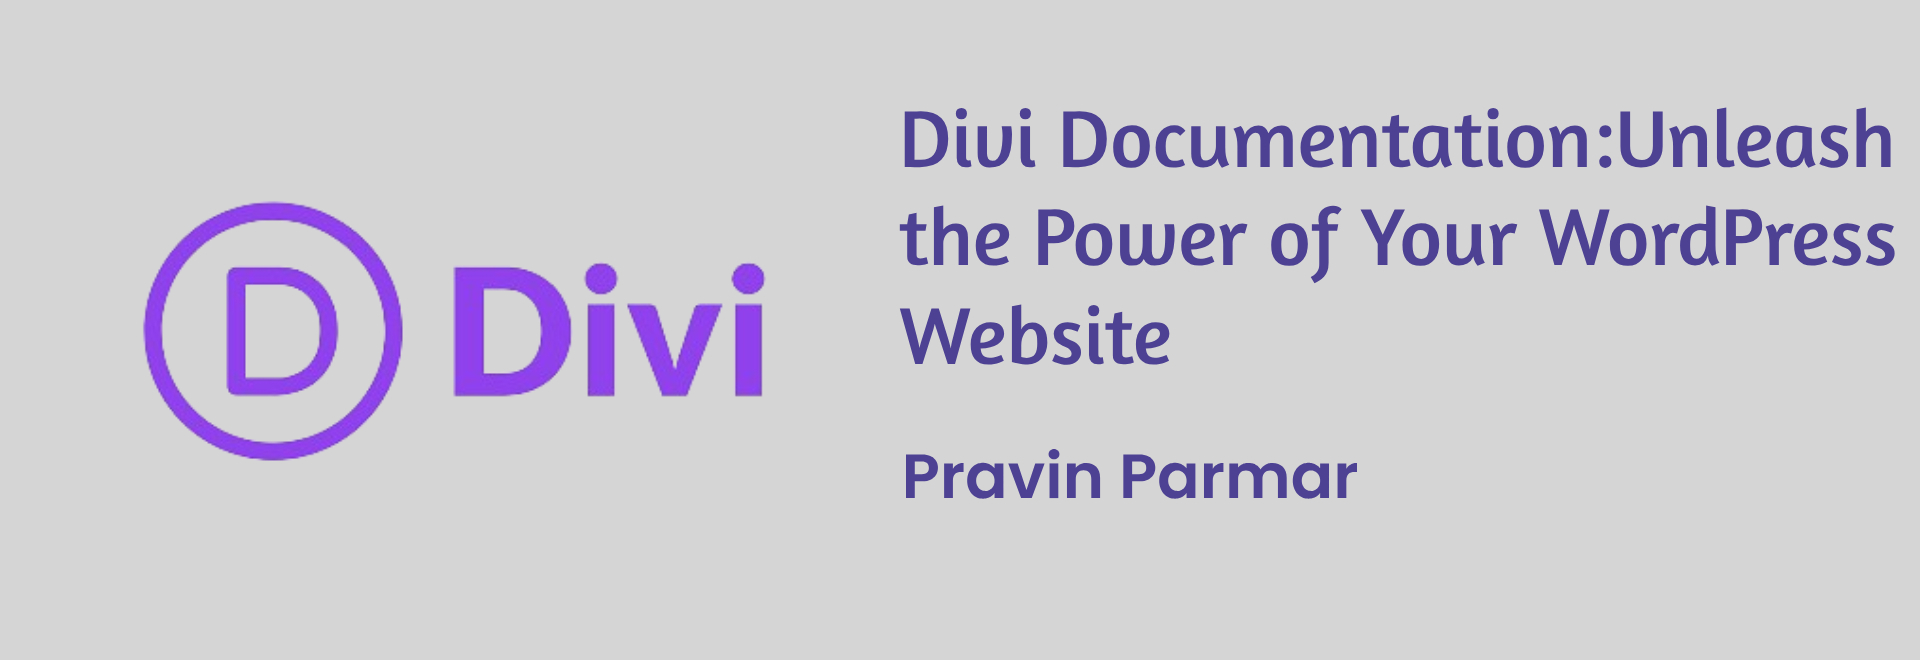 Comprehensive Guide to Divi Documentation: Unleash the Power of Your WordPress Website